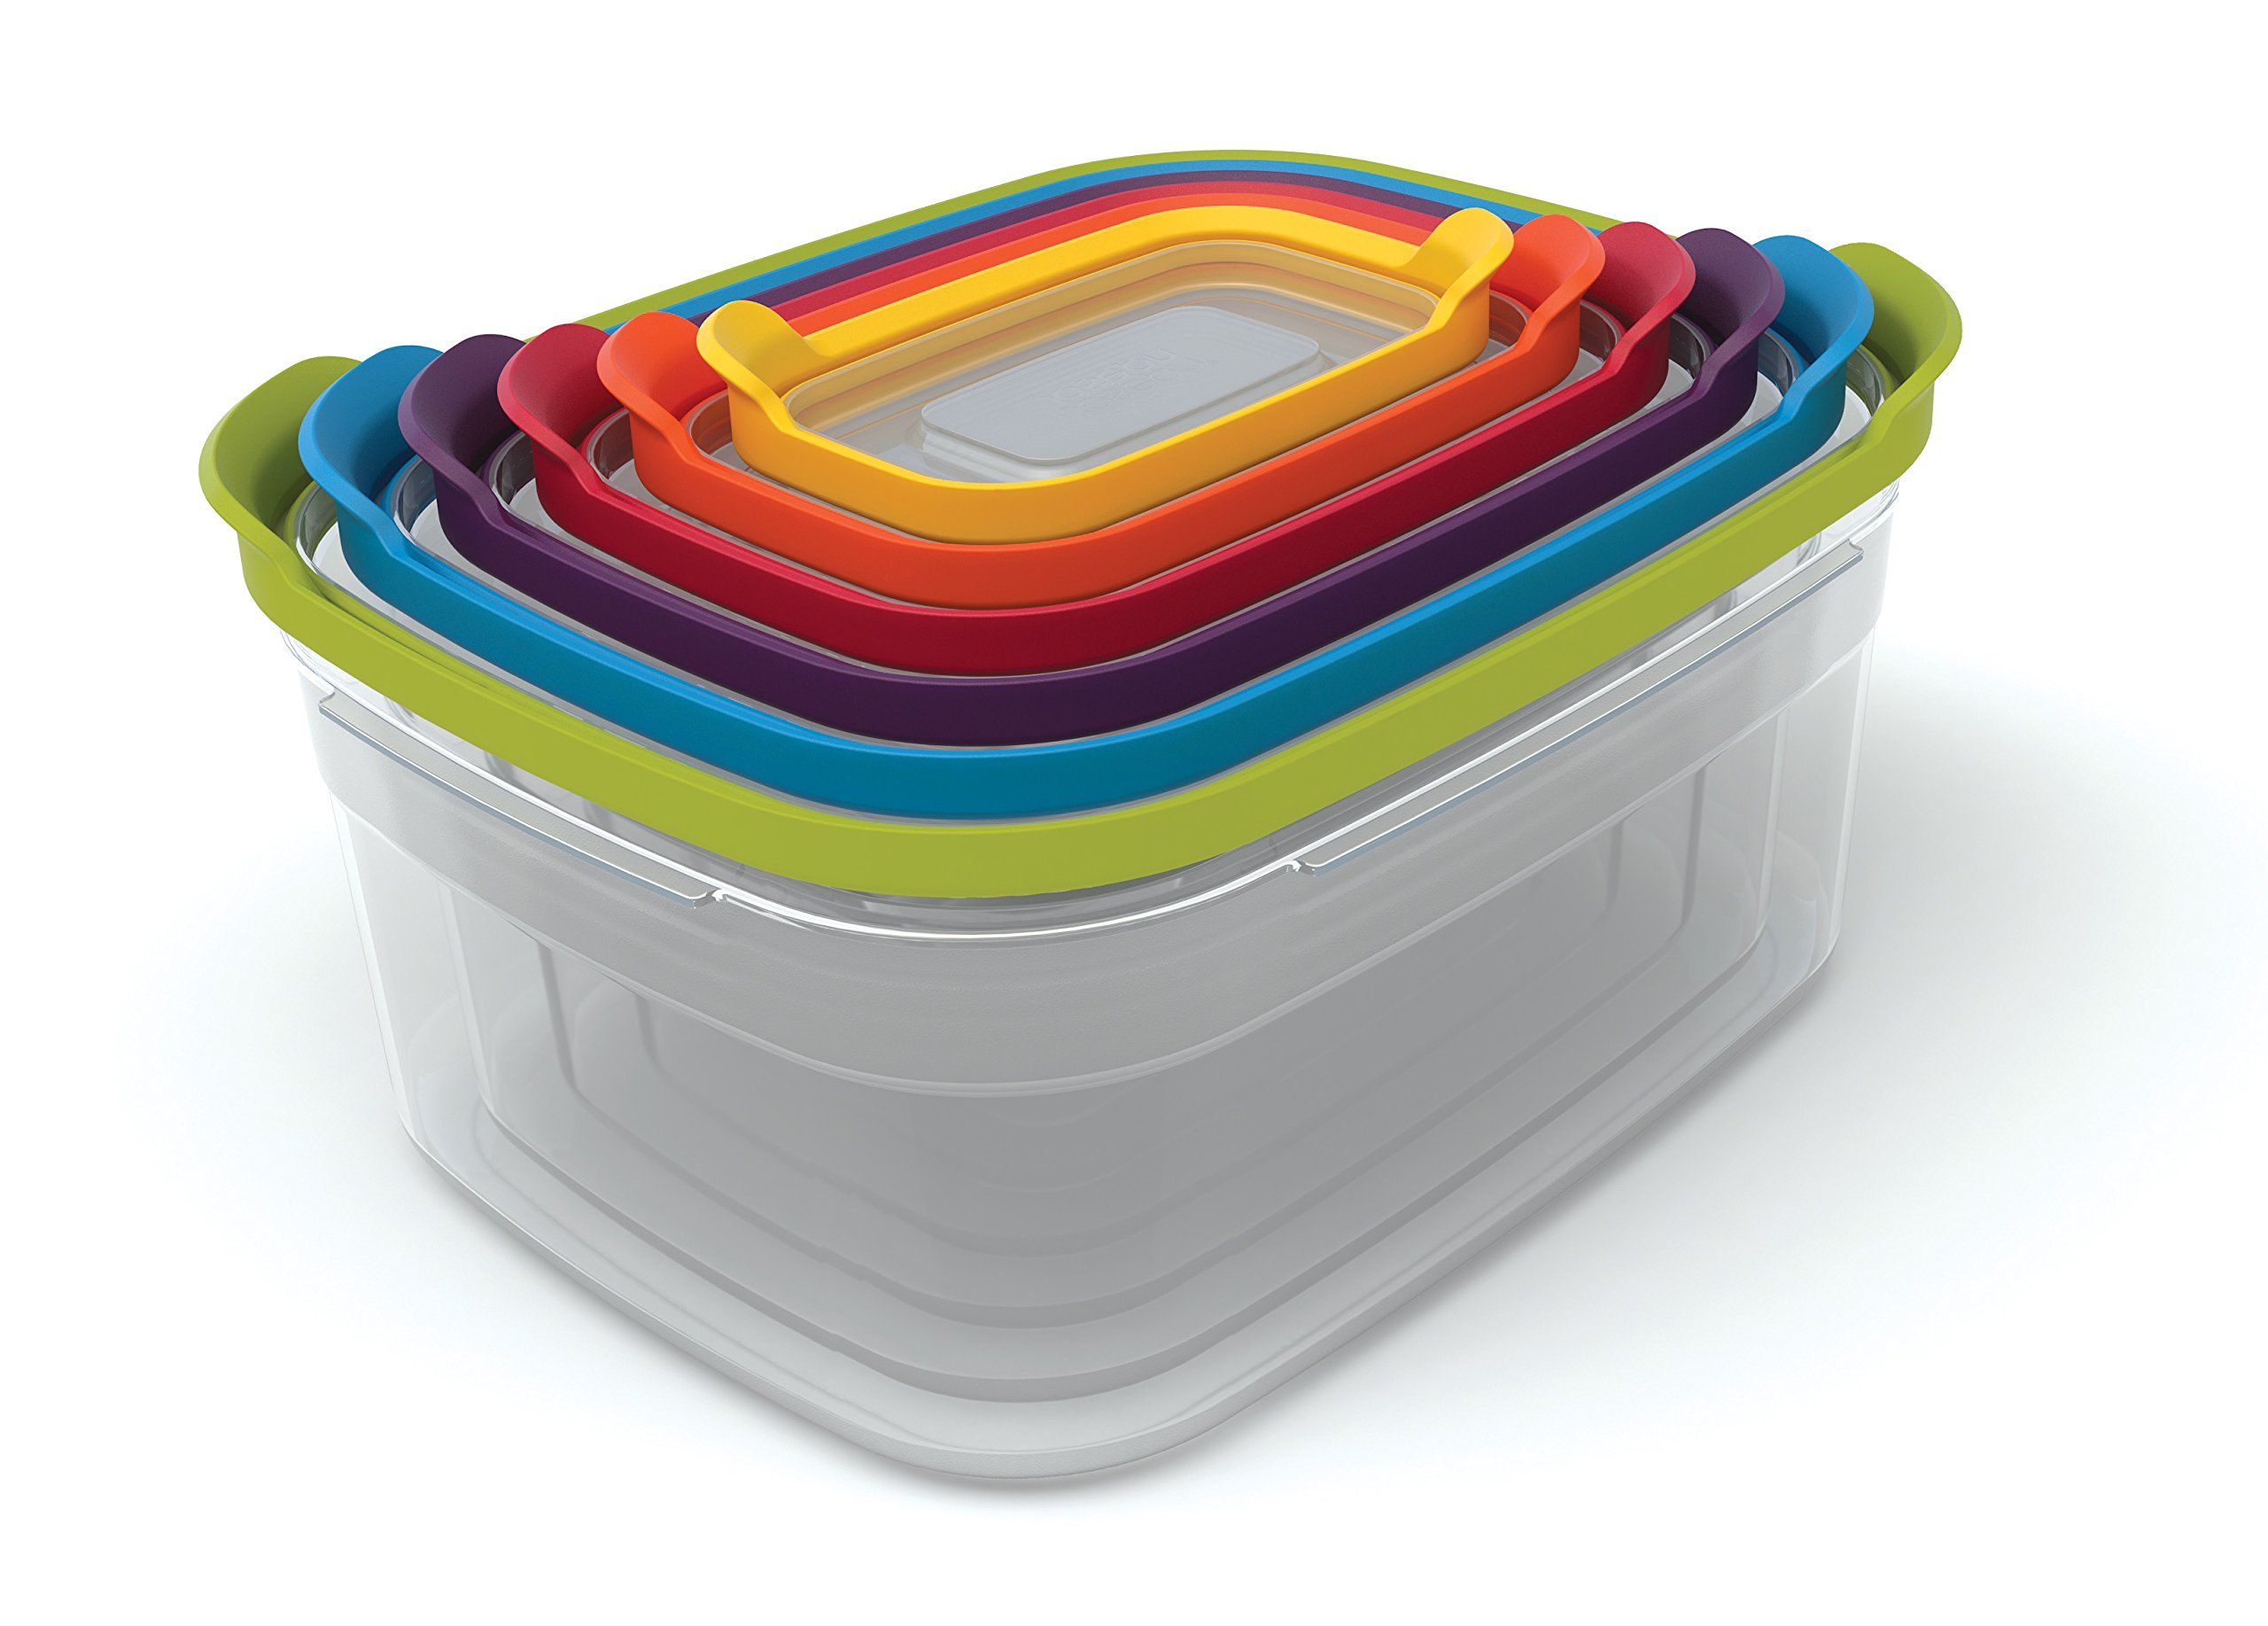 Joseph Joseph Nest Lock 10-Piece and Nest 12-Piece Plastic Food Storage Container Sets with Lockable Airtight Leakproof Lids